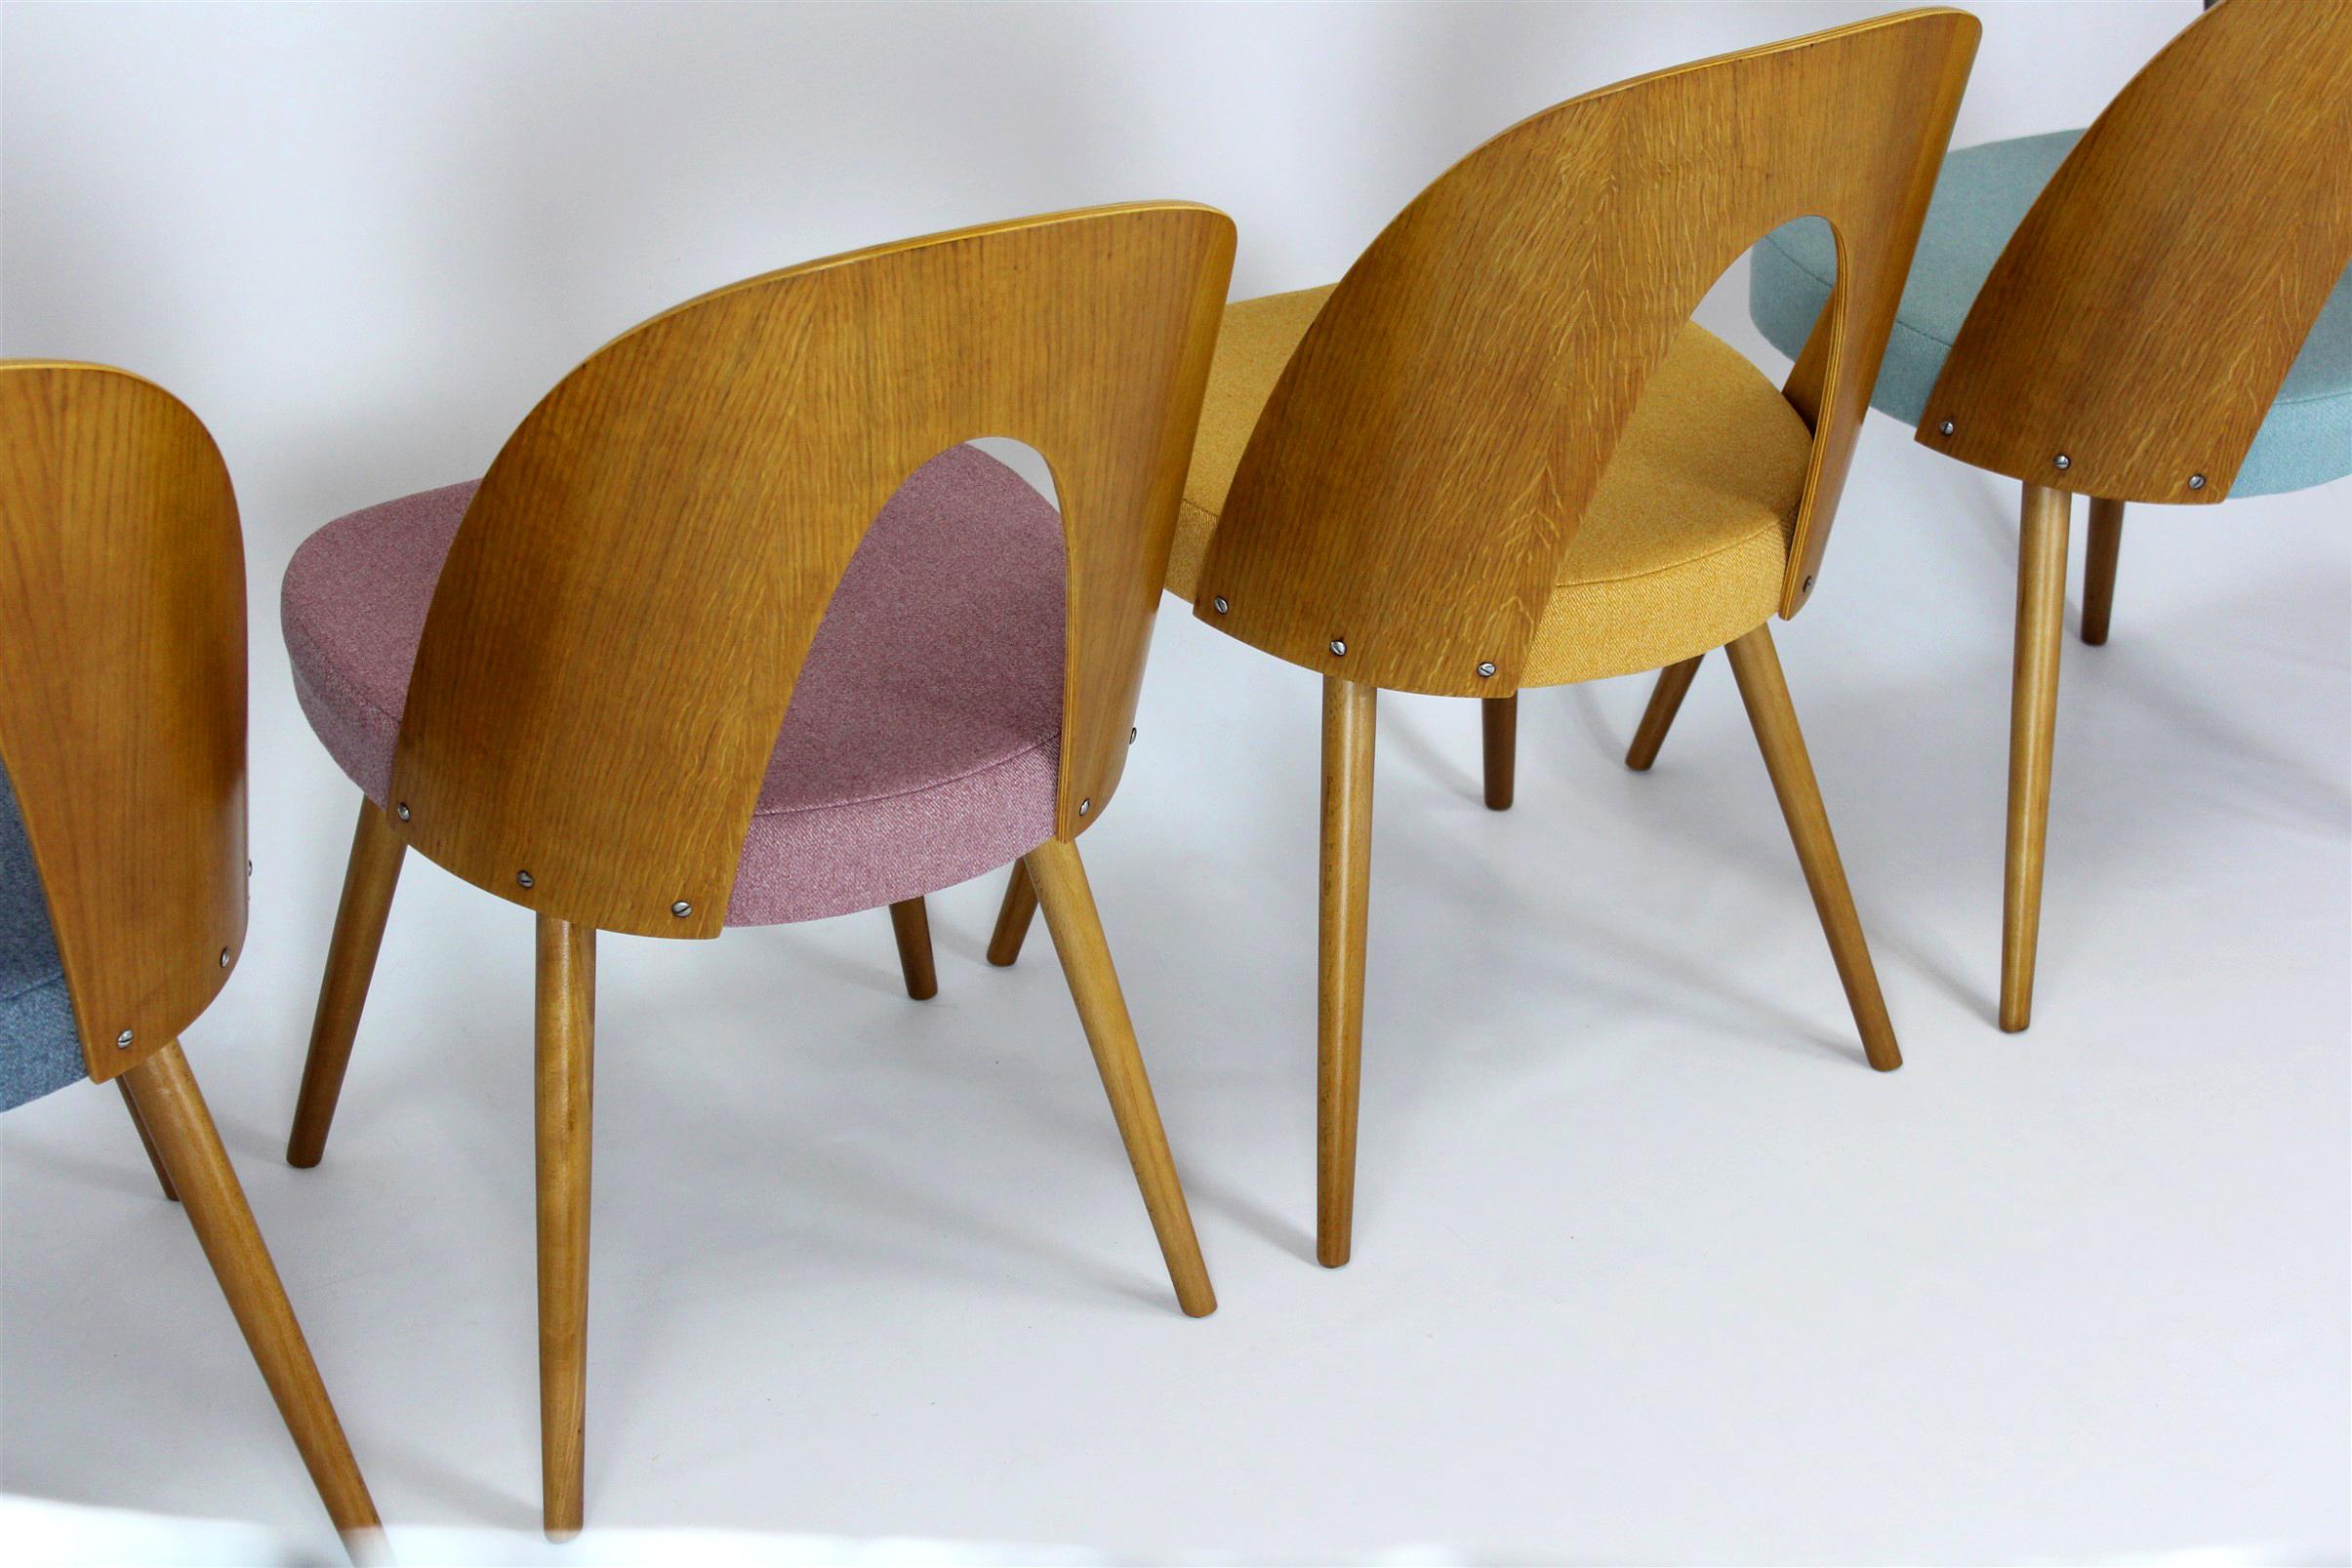 A set of four chairs, designed in the 1960s by Antonin Suman. The chairs are made of beech wood, the backrests are bent plywood with oak veneer.
The chairs have been restored - have new seat foam upholstered with a fabric with increased resistance